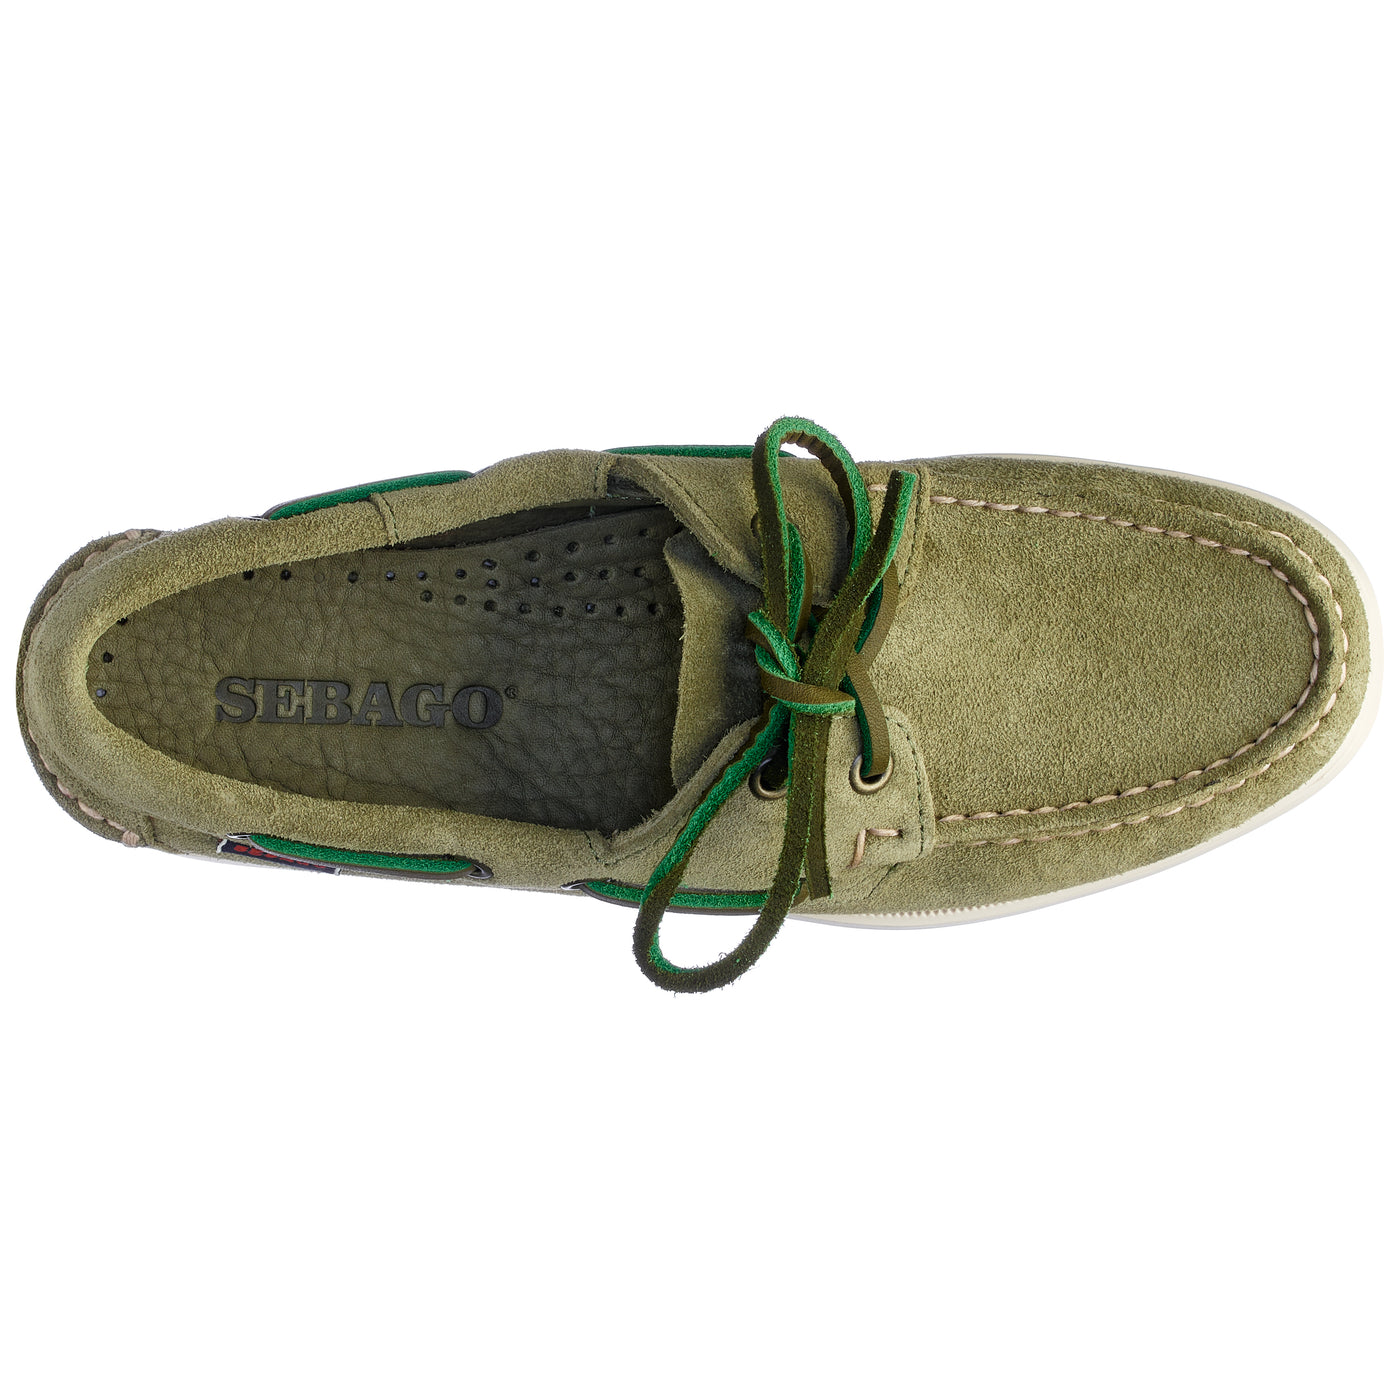 Portland Roughout Woman - Forest Green